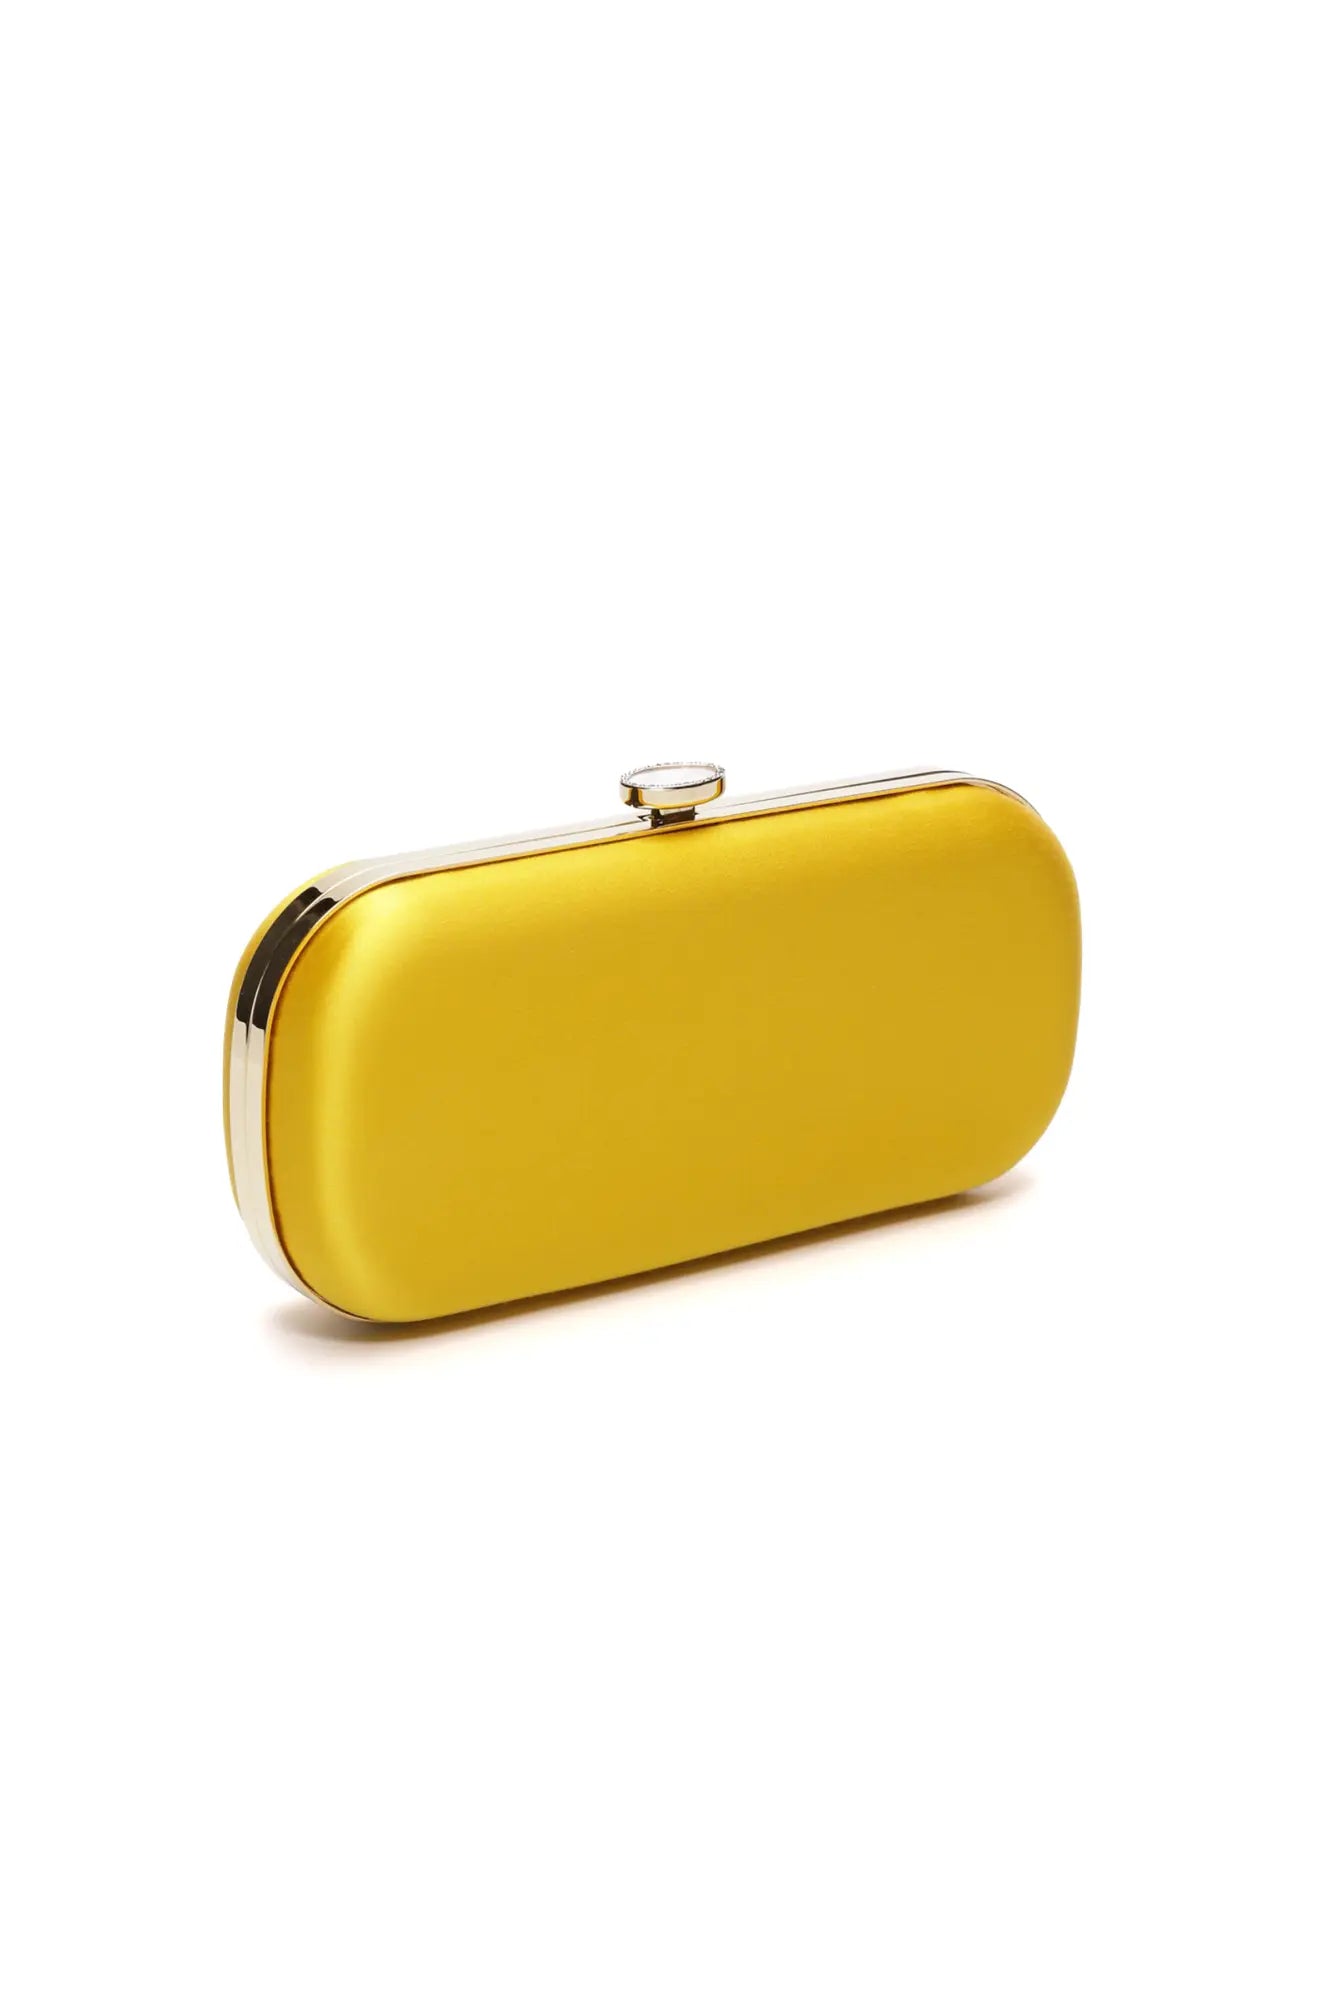 Bright yellow Bella Clutch Limoncello Yellow Grande from The Bella Rosa Collection against a white background.